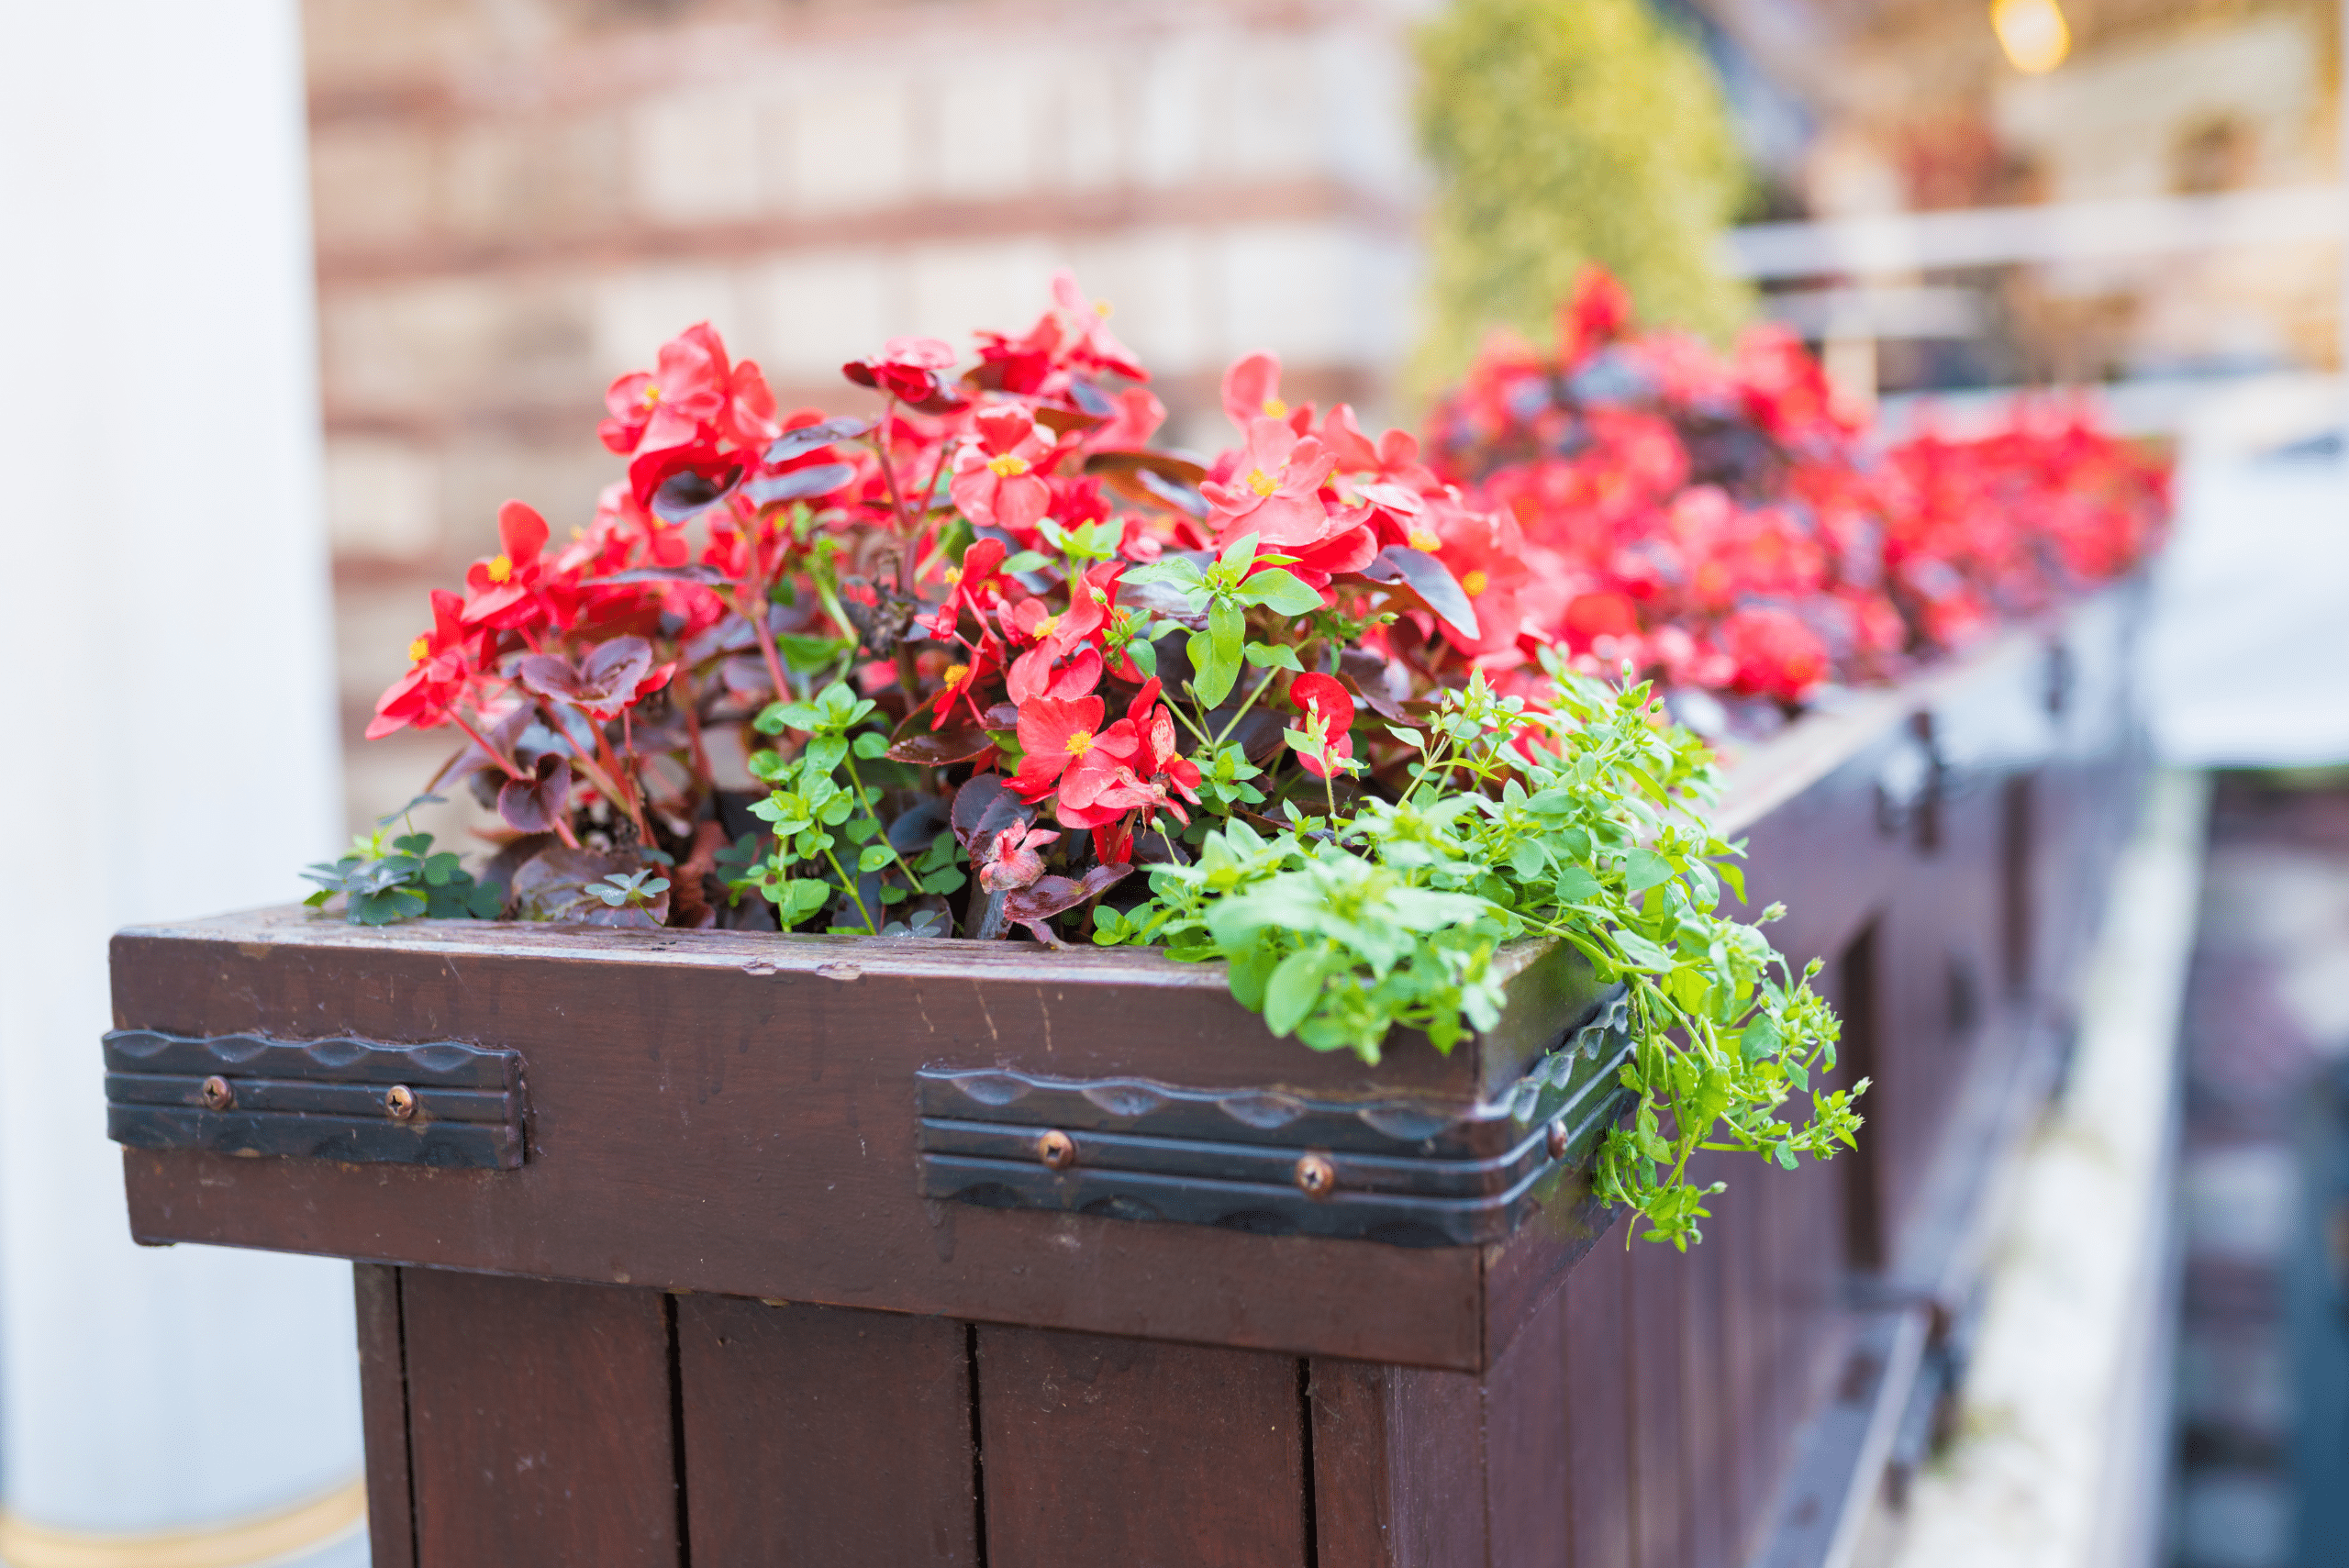 Red flowers planted in a planter box with metal accents on corners.